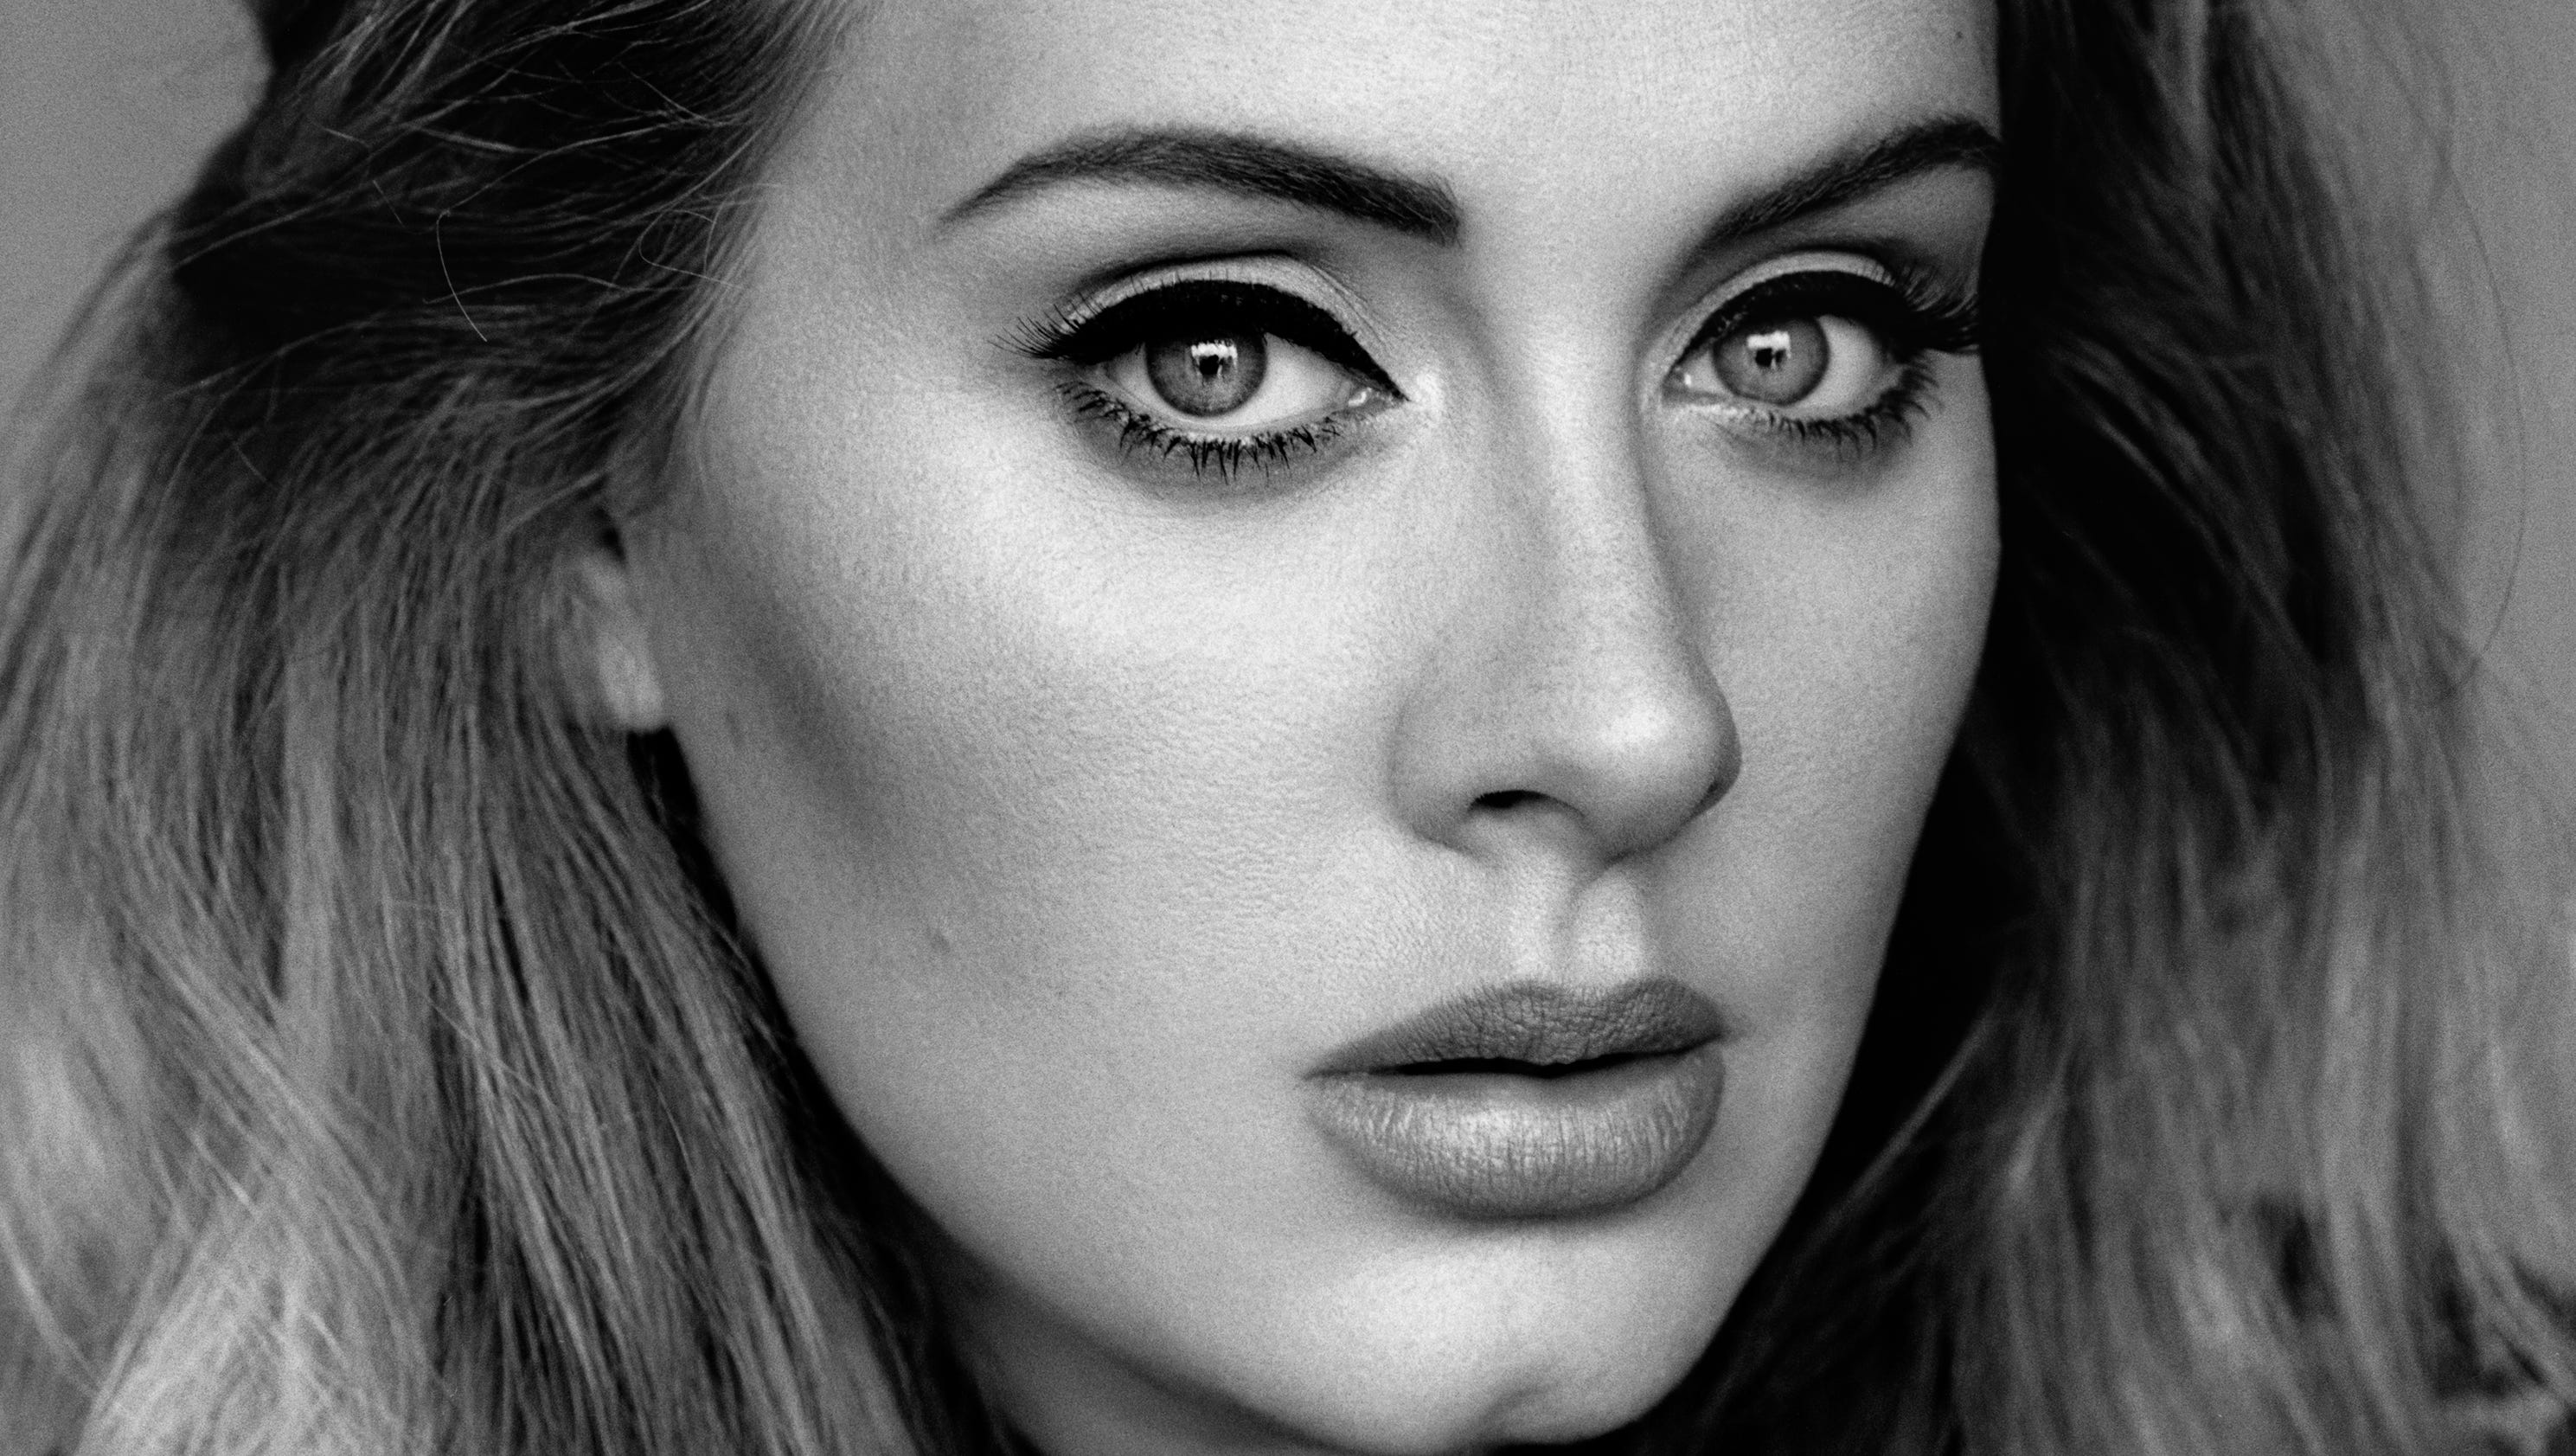 Adele channeled her 'early-life crisis' into long-awaited new album, '25'3200 x 1680